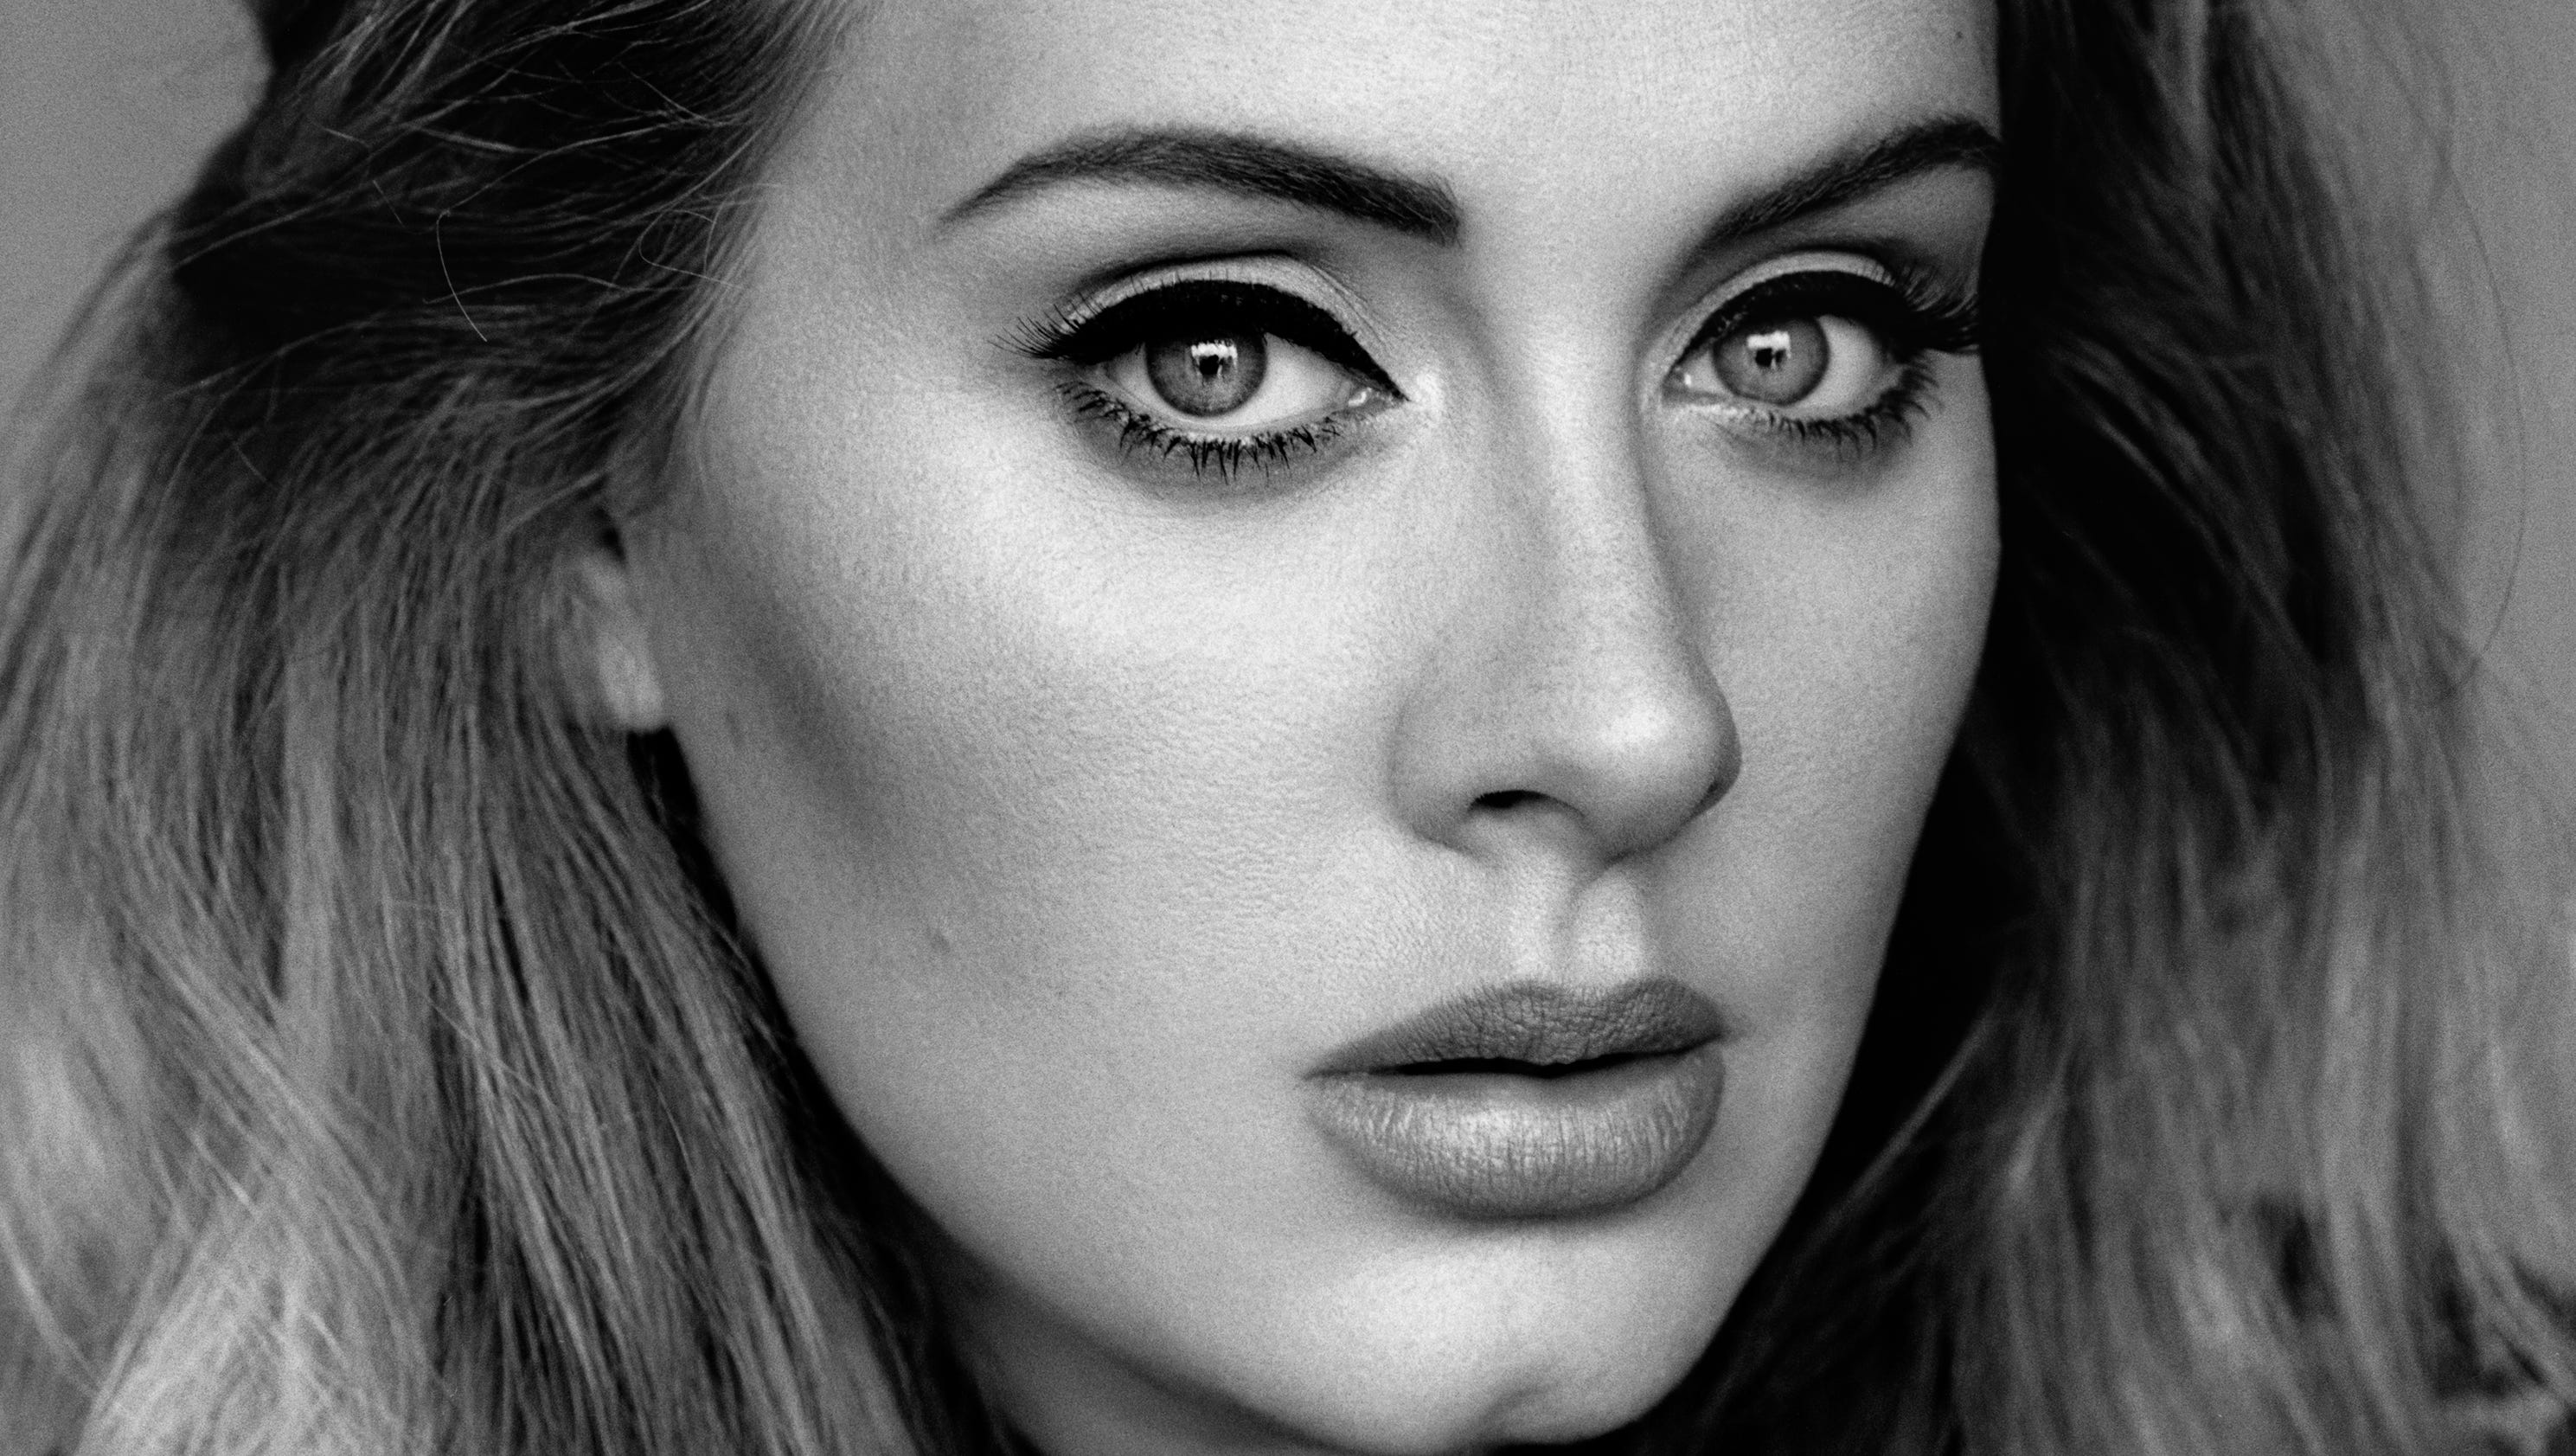 Adele channeled her 'early-life crisis' into long-awaited new album, '25'3200 x 1680